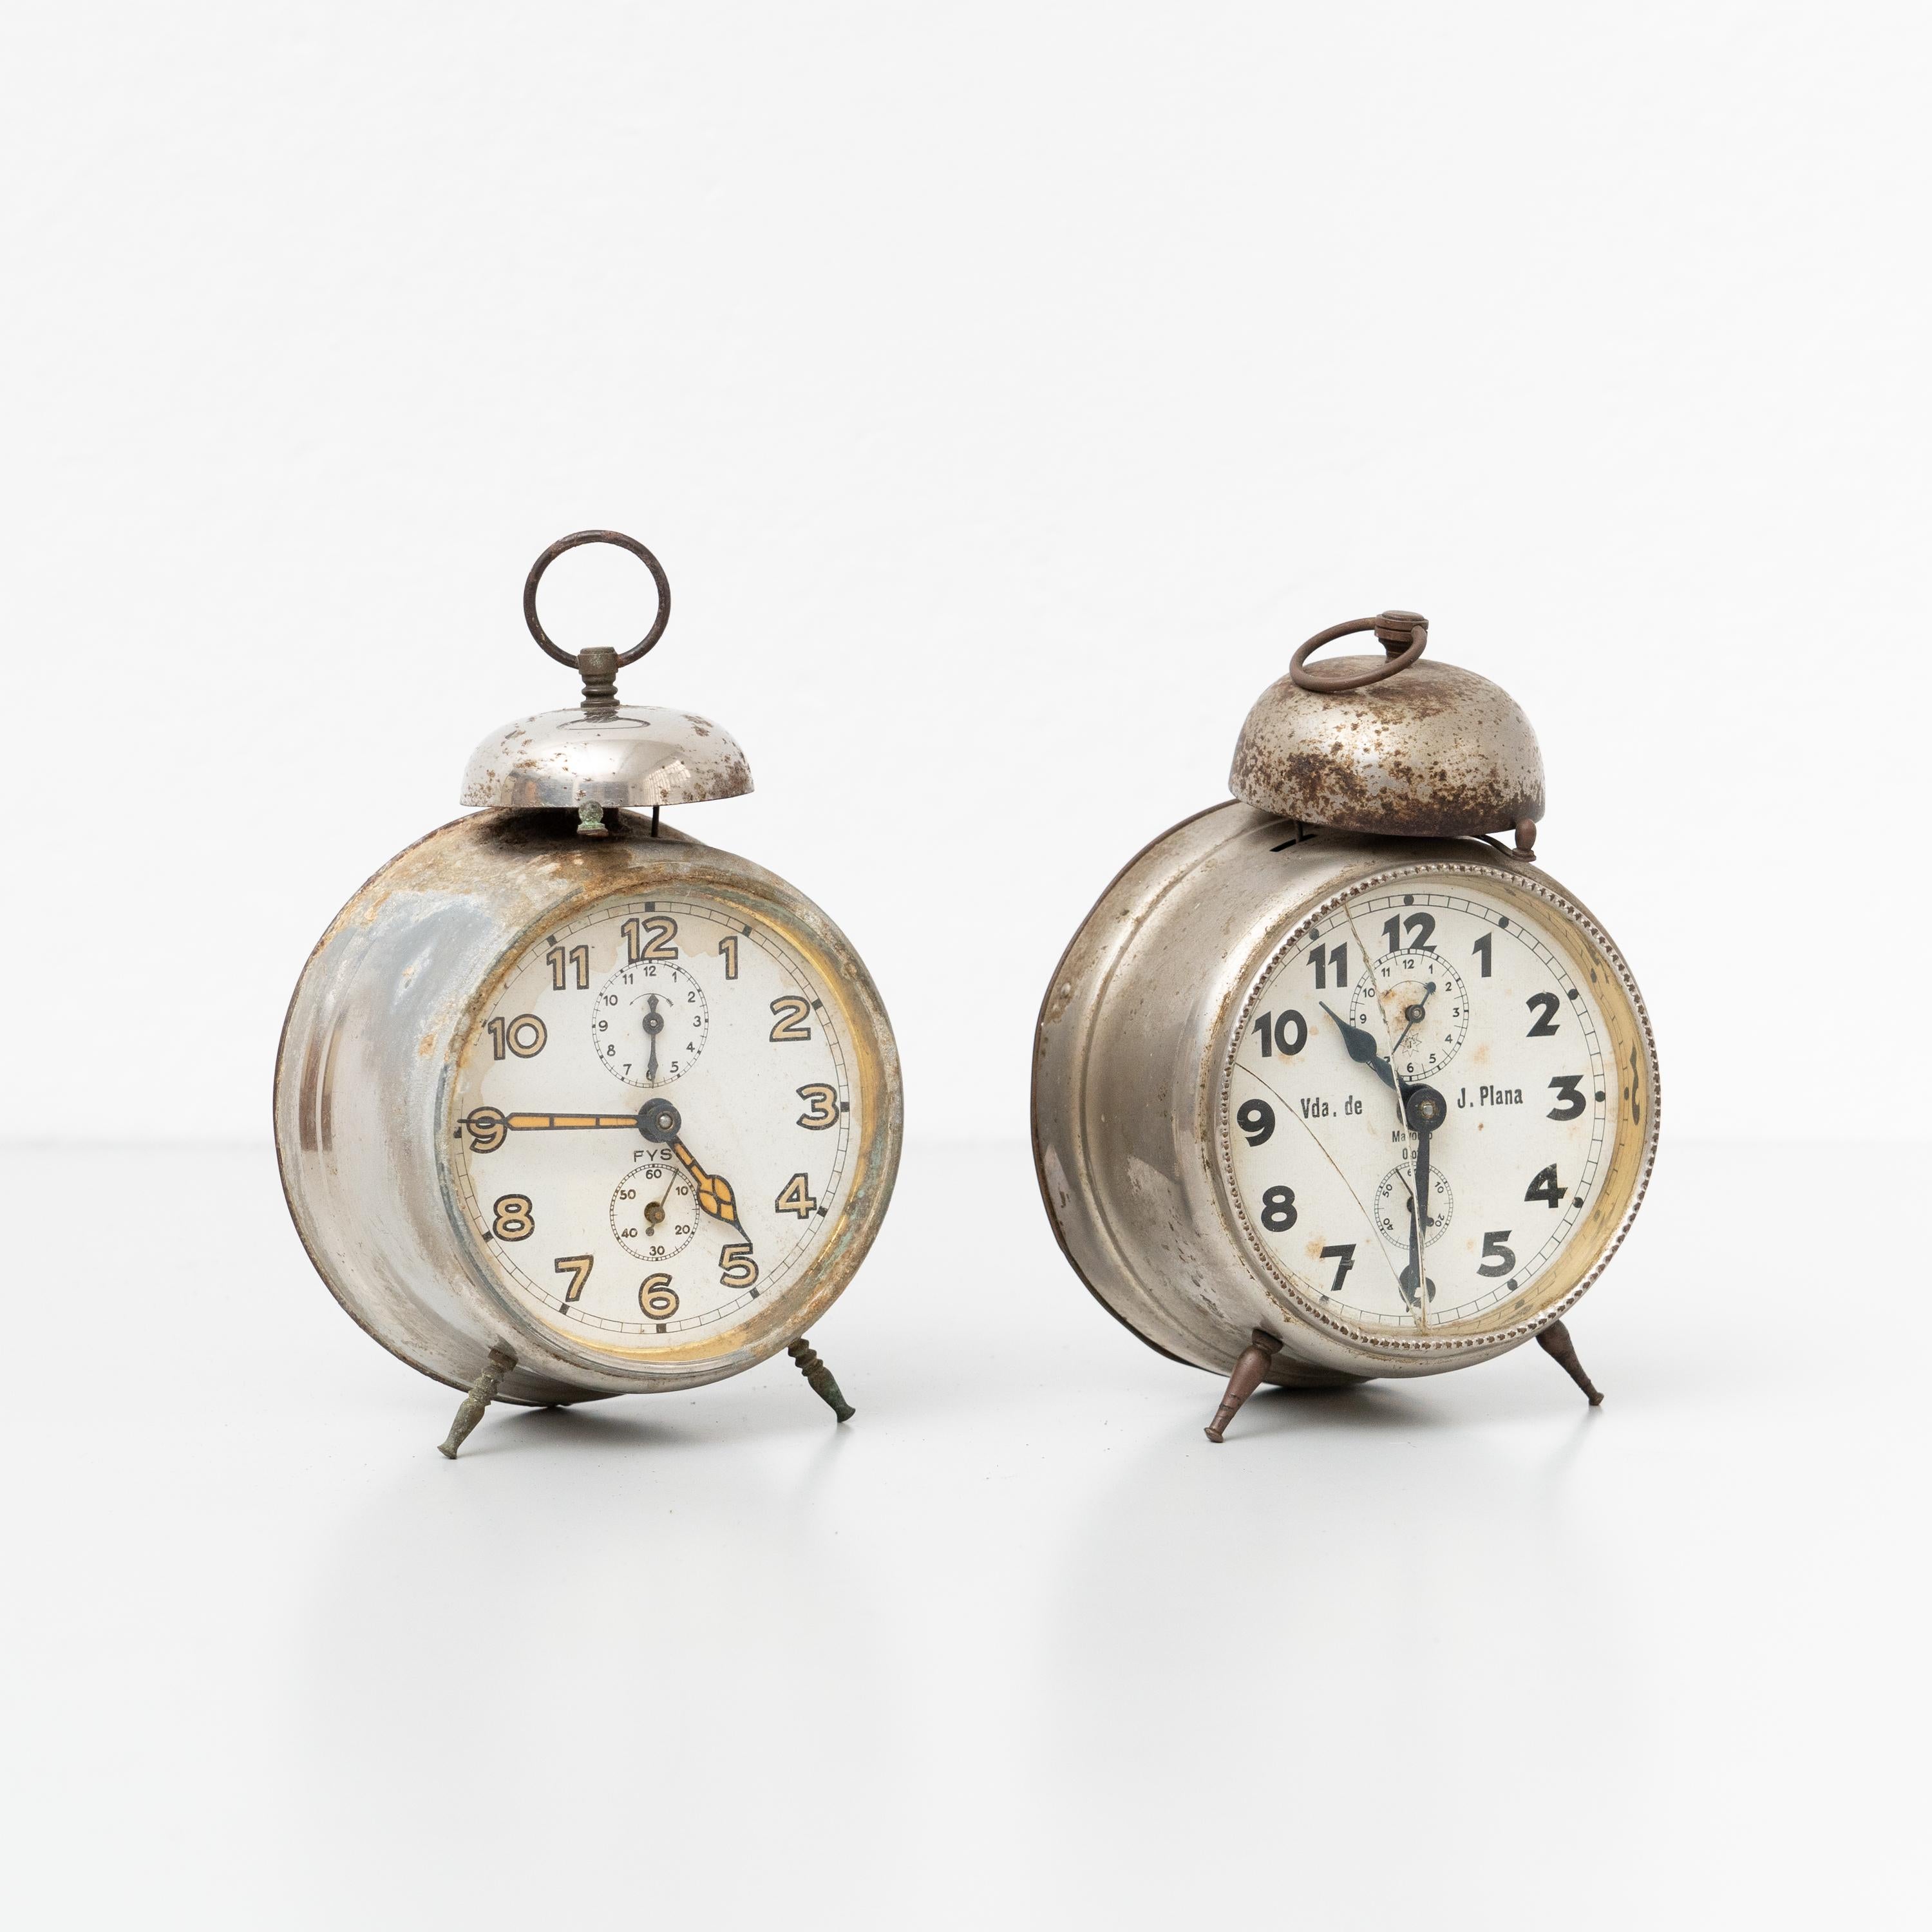 Set of Two vintage Spanish traditional alarm clocks.

Manufactured by unknown company in Spain, circa 1960.

In original condition with minor wear consistent of age and use, preserving a beautiful patina.

Materials:
Metal.